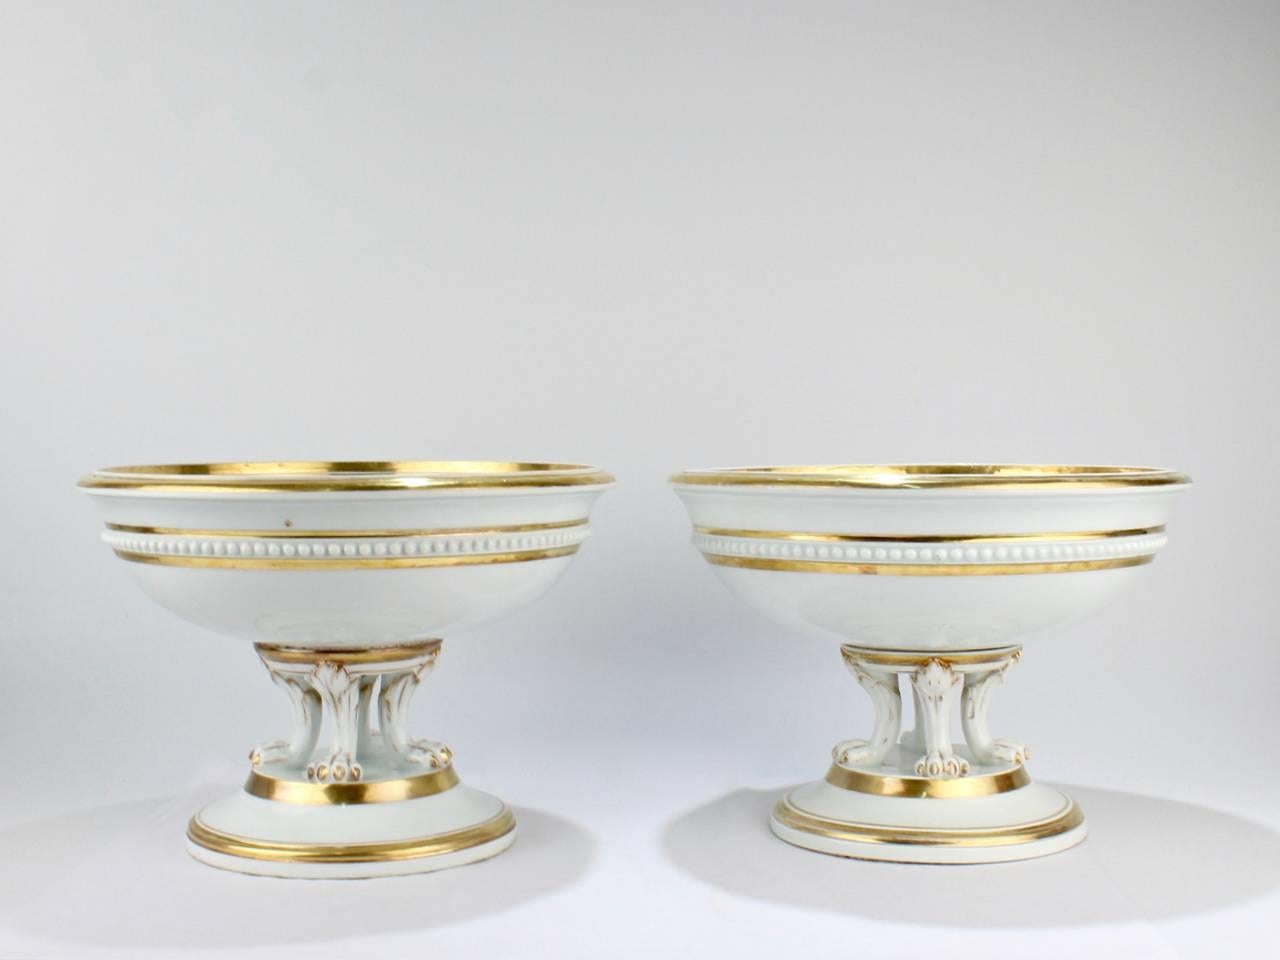 A rare and wonderful pair of antique Meissen porcelain topographical tazzas or footed bowls.

Each bowl has a central hand-painted scene, a wide band of gilding to the rim, and beading to the girth. Each is supported by claw feet and a plunger base.